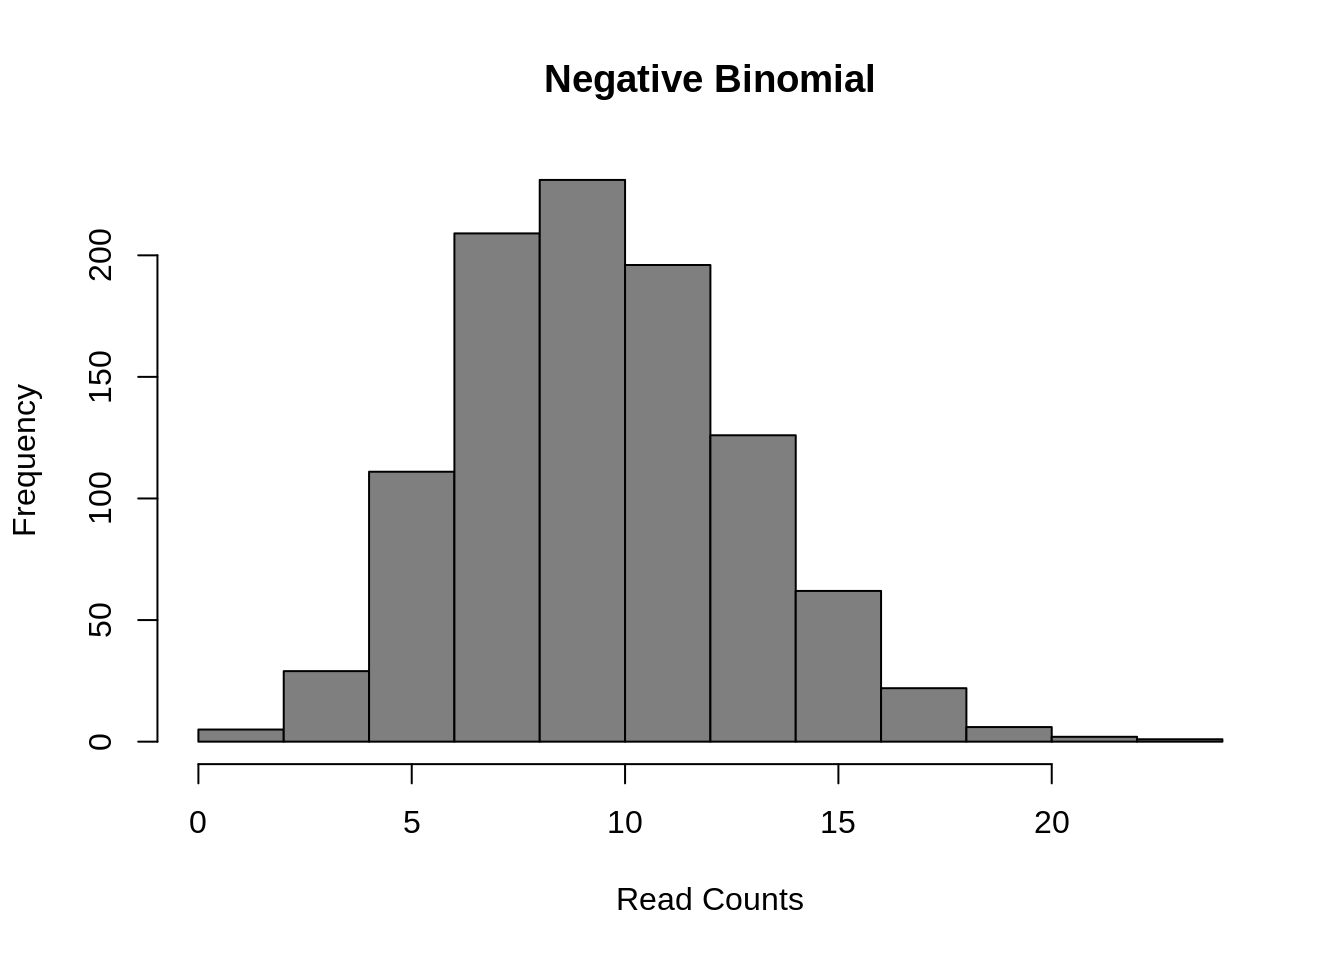 Negative Binomial distribution of read counts for a single gene across 1000 cells